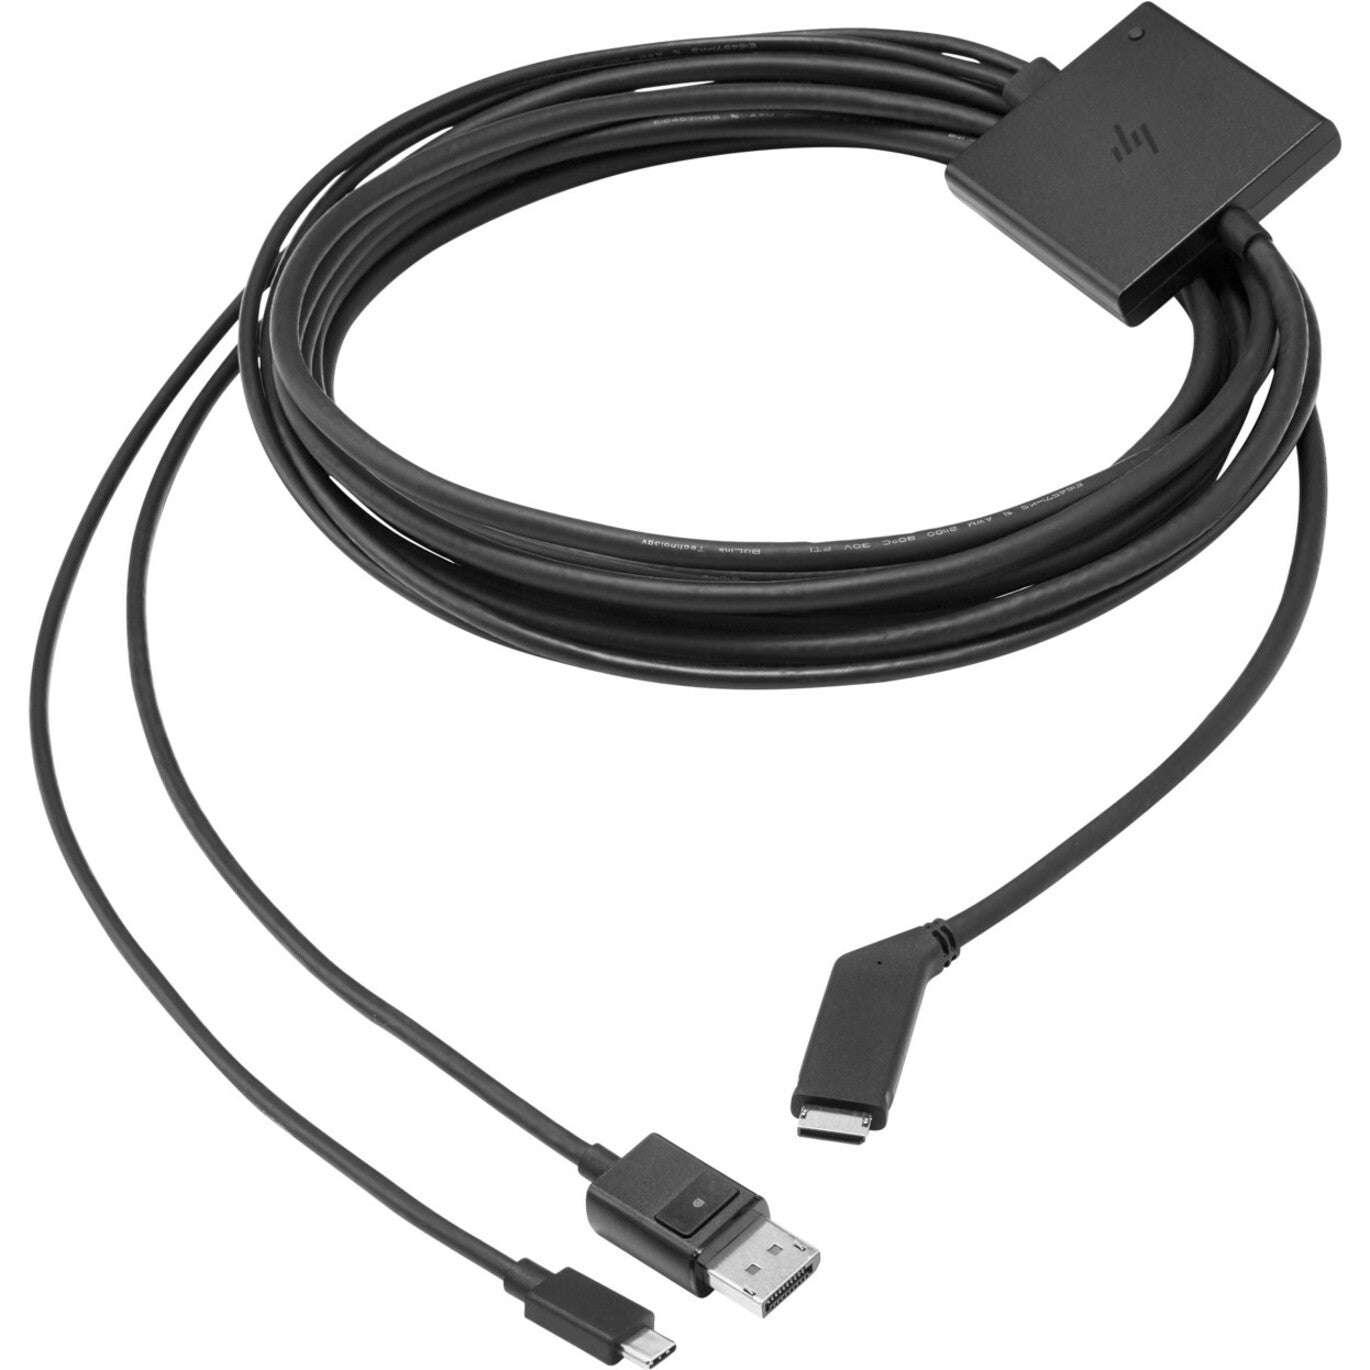 HP 22J68AA Reverb G2 6 Meter Cable, Data Transfer Cable for Virtual Reality Headset